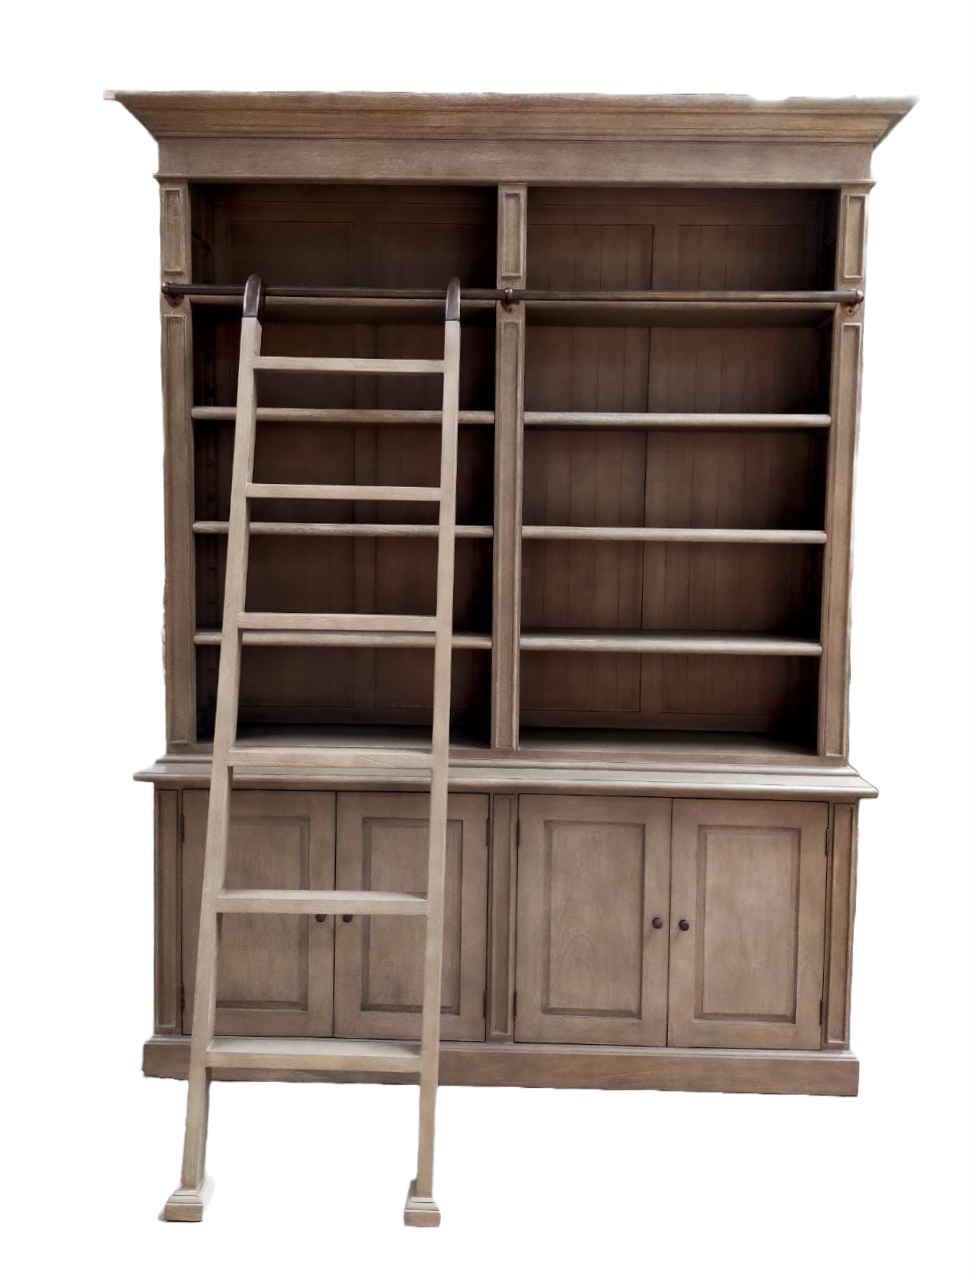 TWO BAY LIBRARY BOOKCASE WITH LADDER - Aged Oak